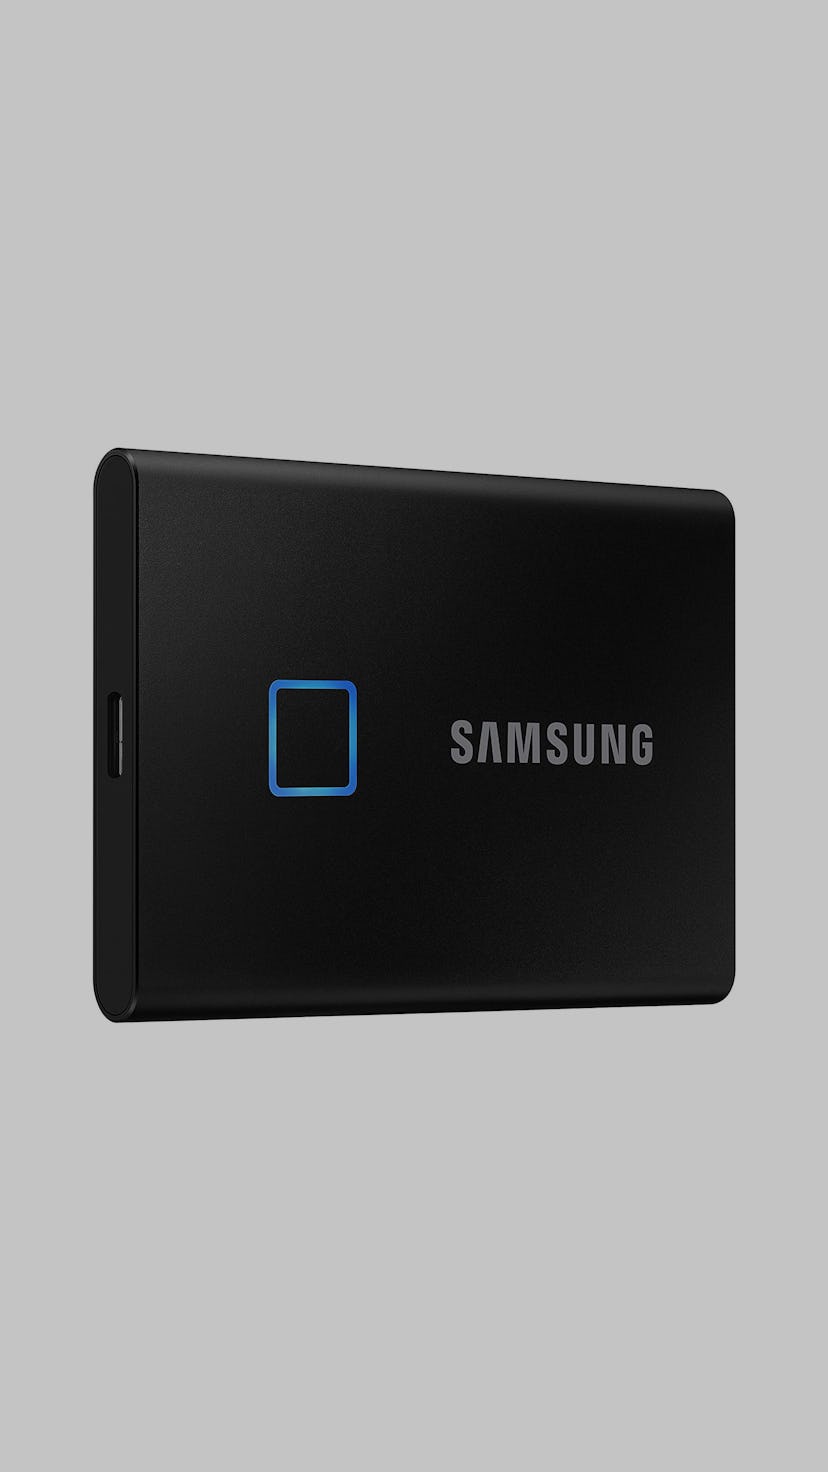 Samsung T7 Touch portable SSD on sale for $170.